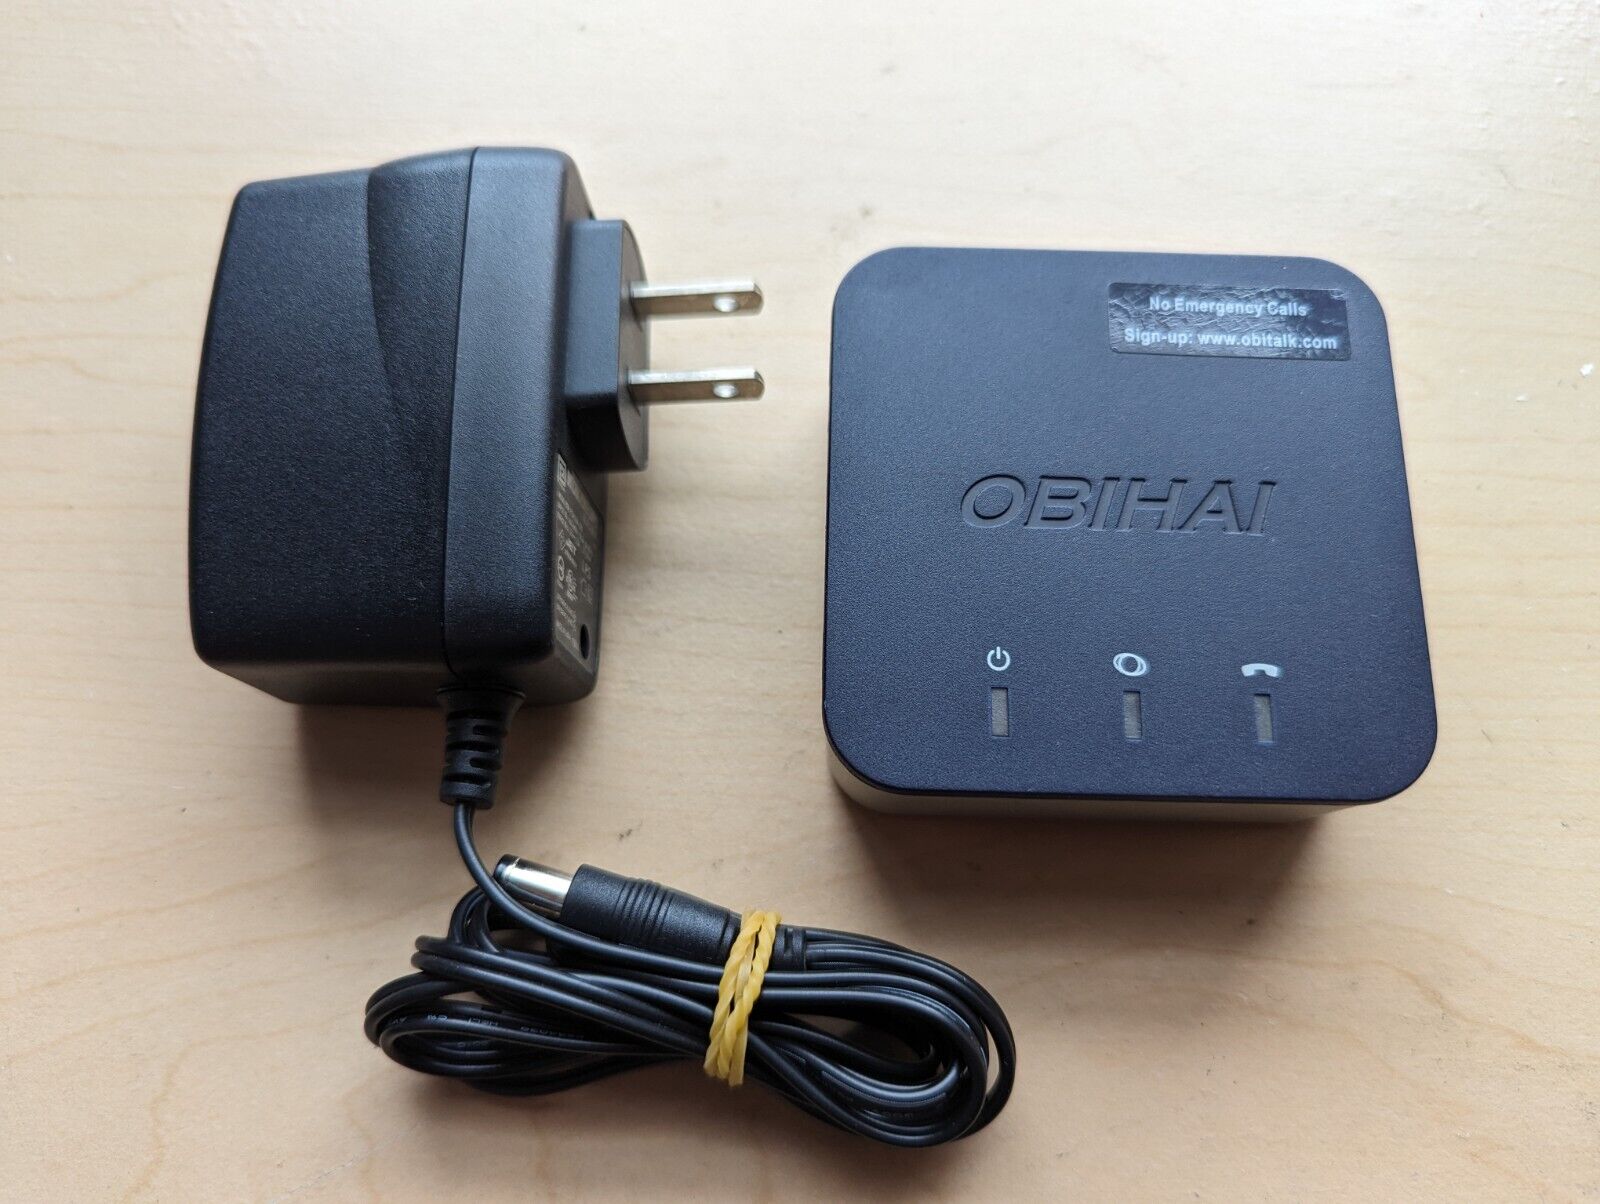 Polycom Obihai OBi200 1-Port VoIP Phone Adapter with Google Voice & Fax Support